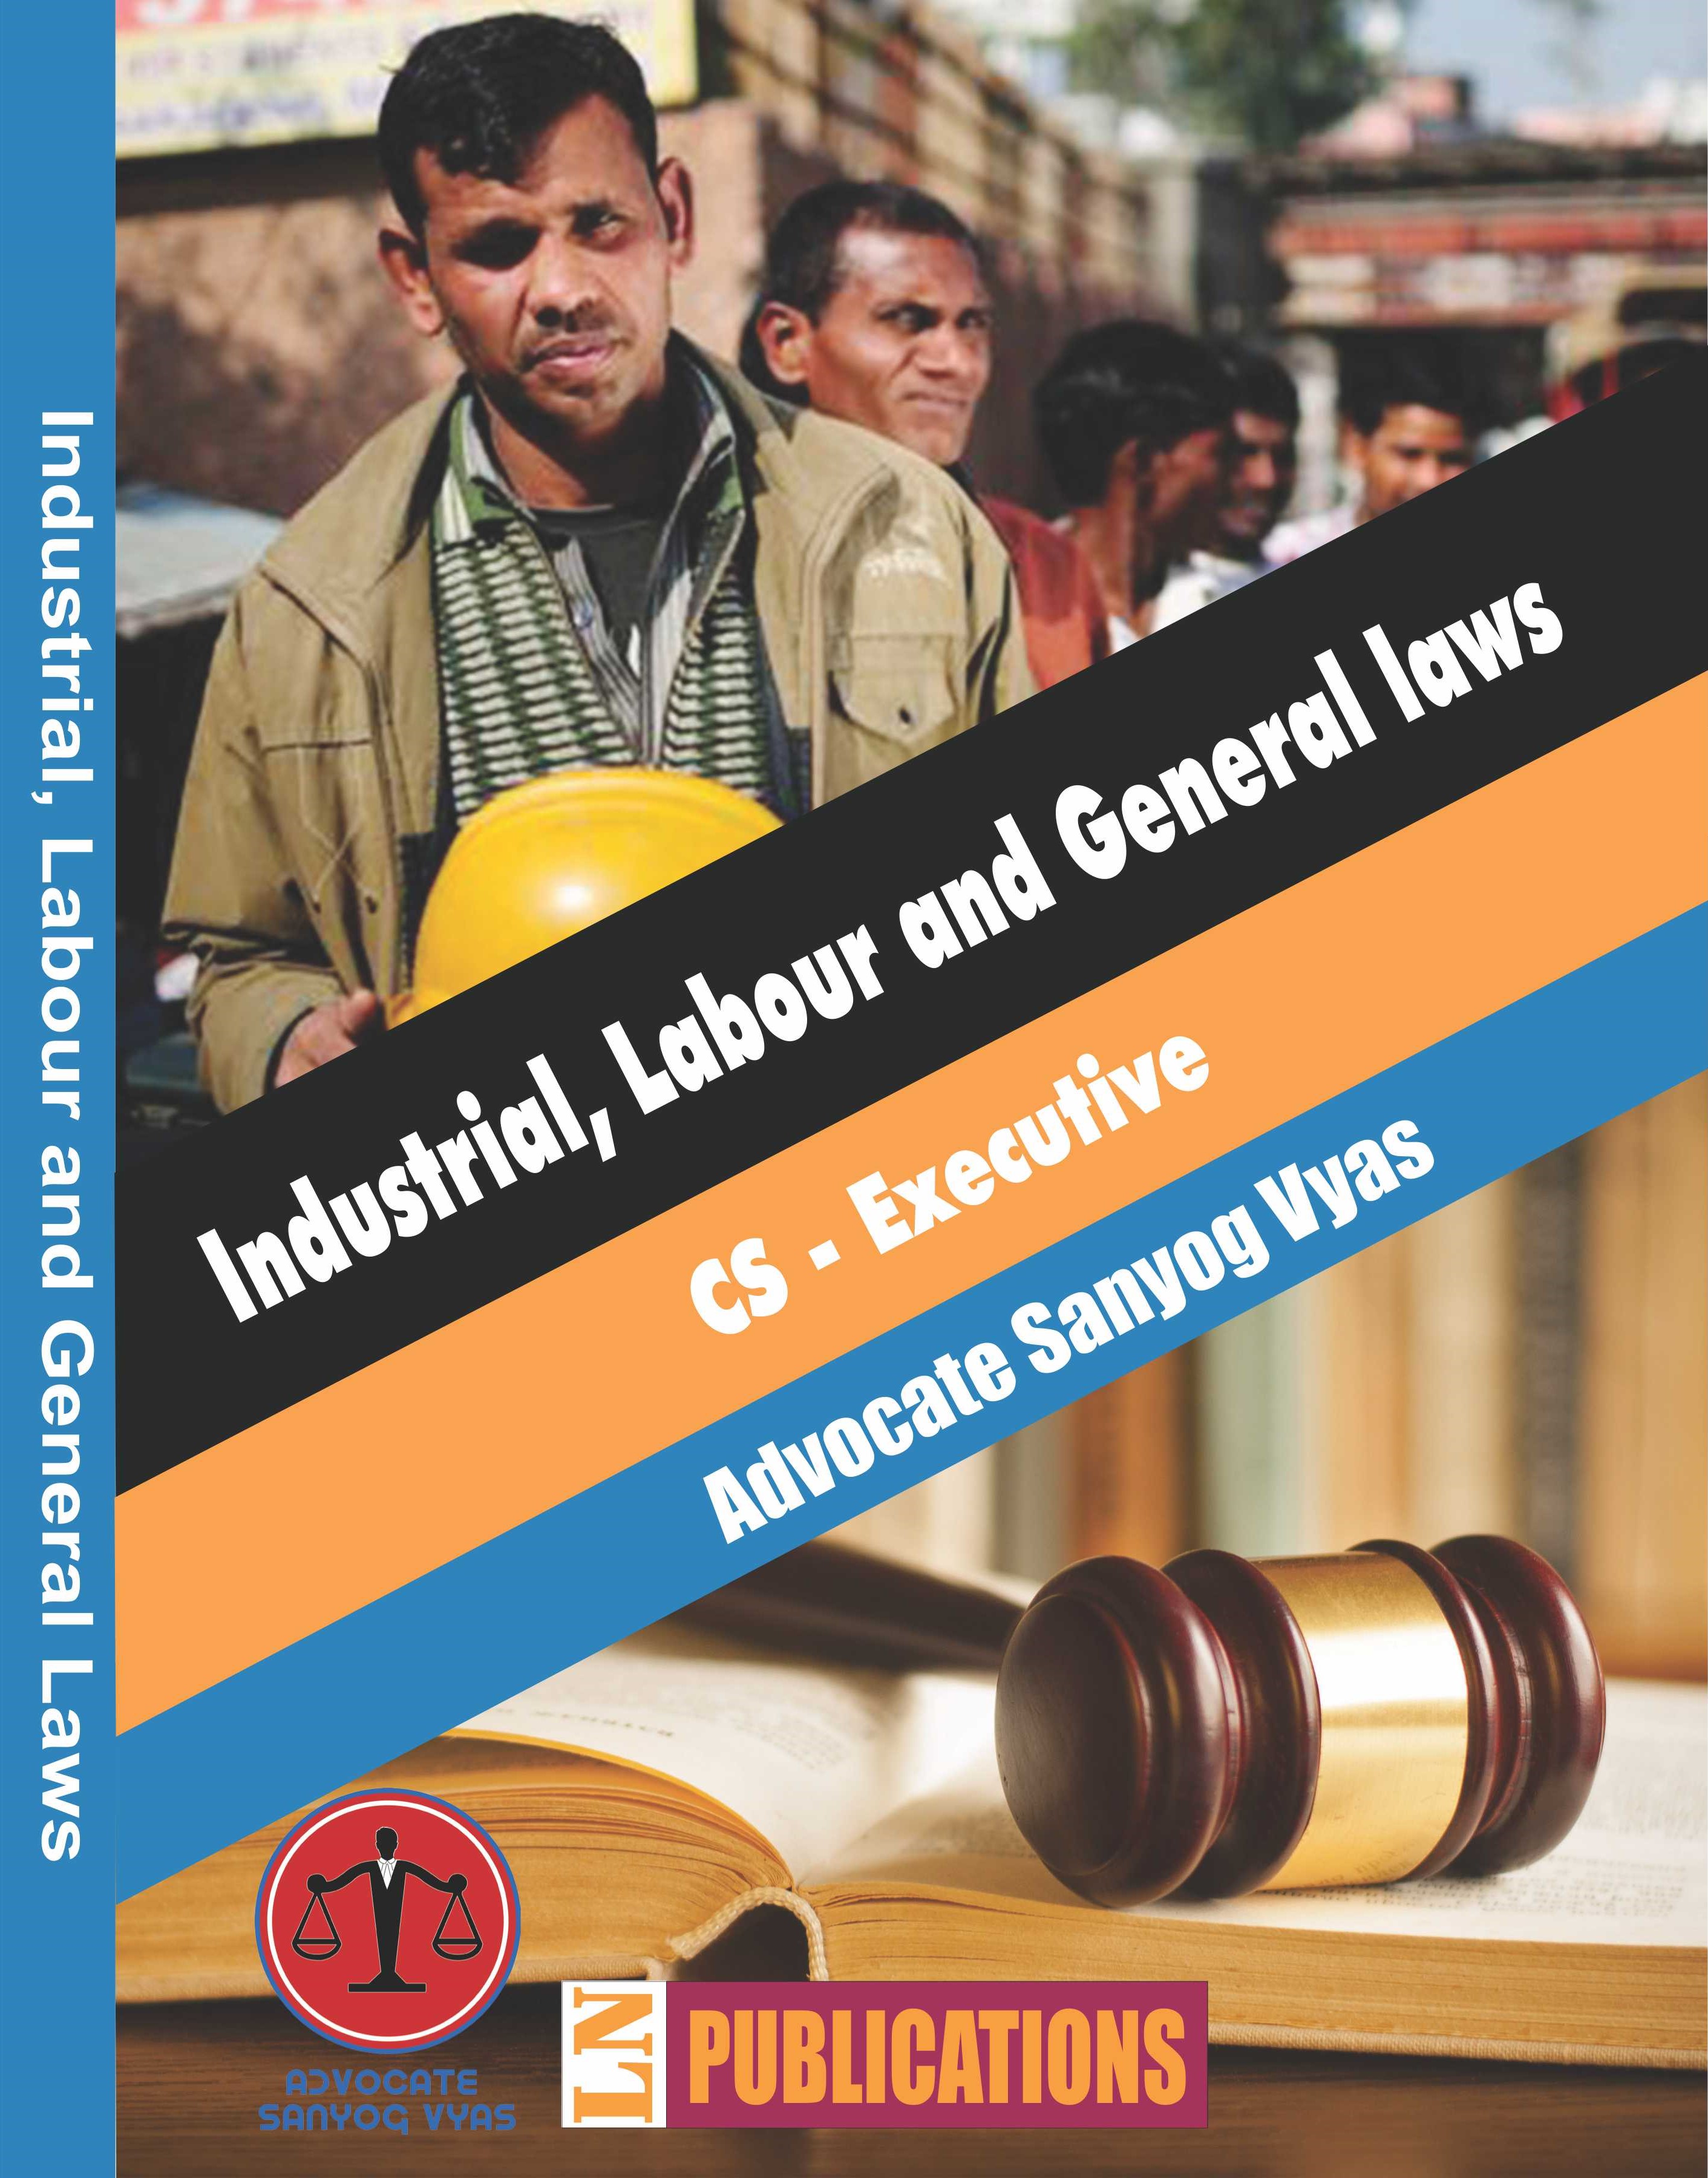 INDUSTRIAL LABOUR and GENERAL LAWS By Sanyog Vyas